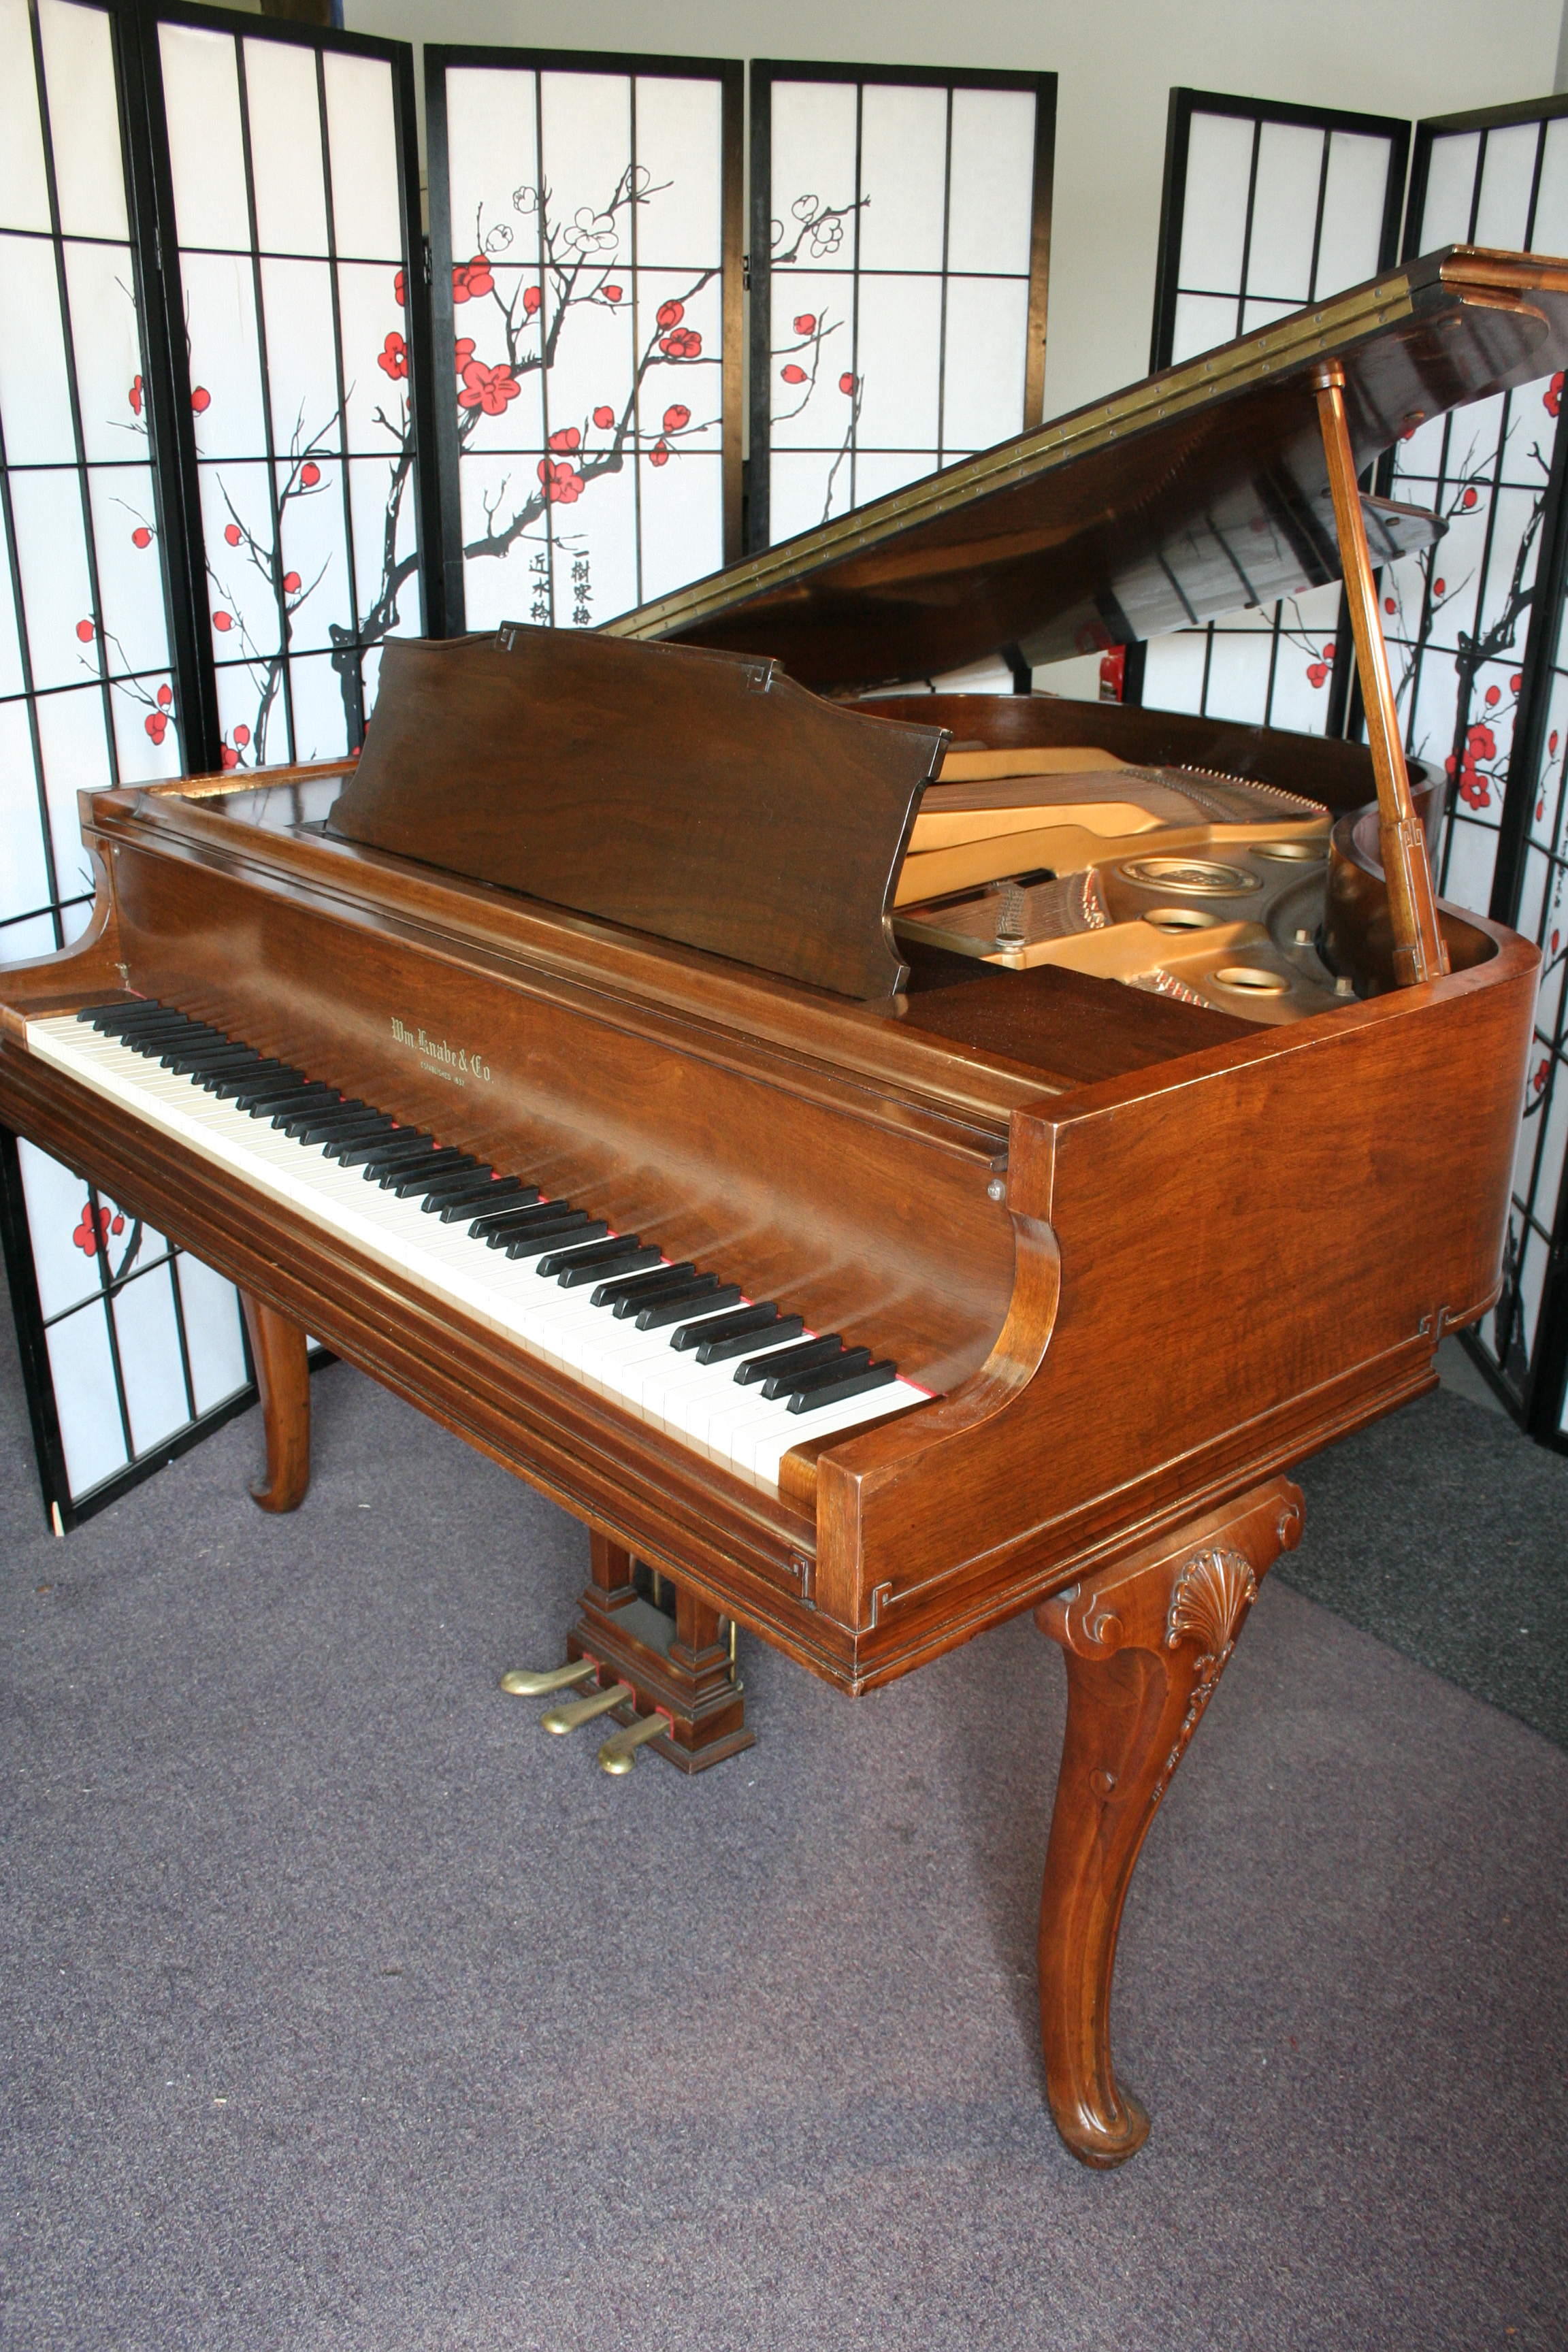 SOLD) Art Case Knabe Grand Piano 5'1' Refurbished/French Polished